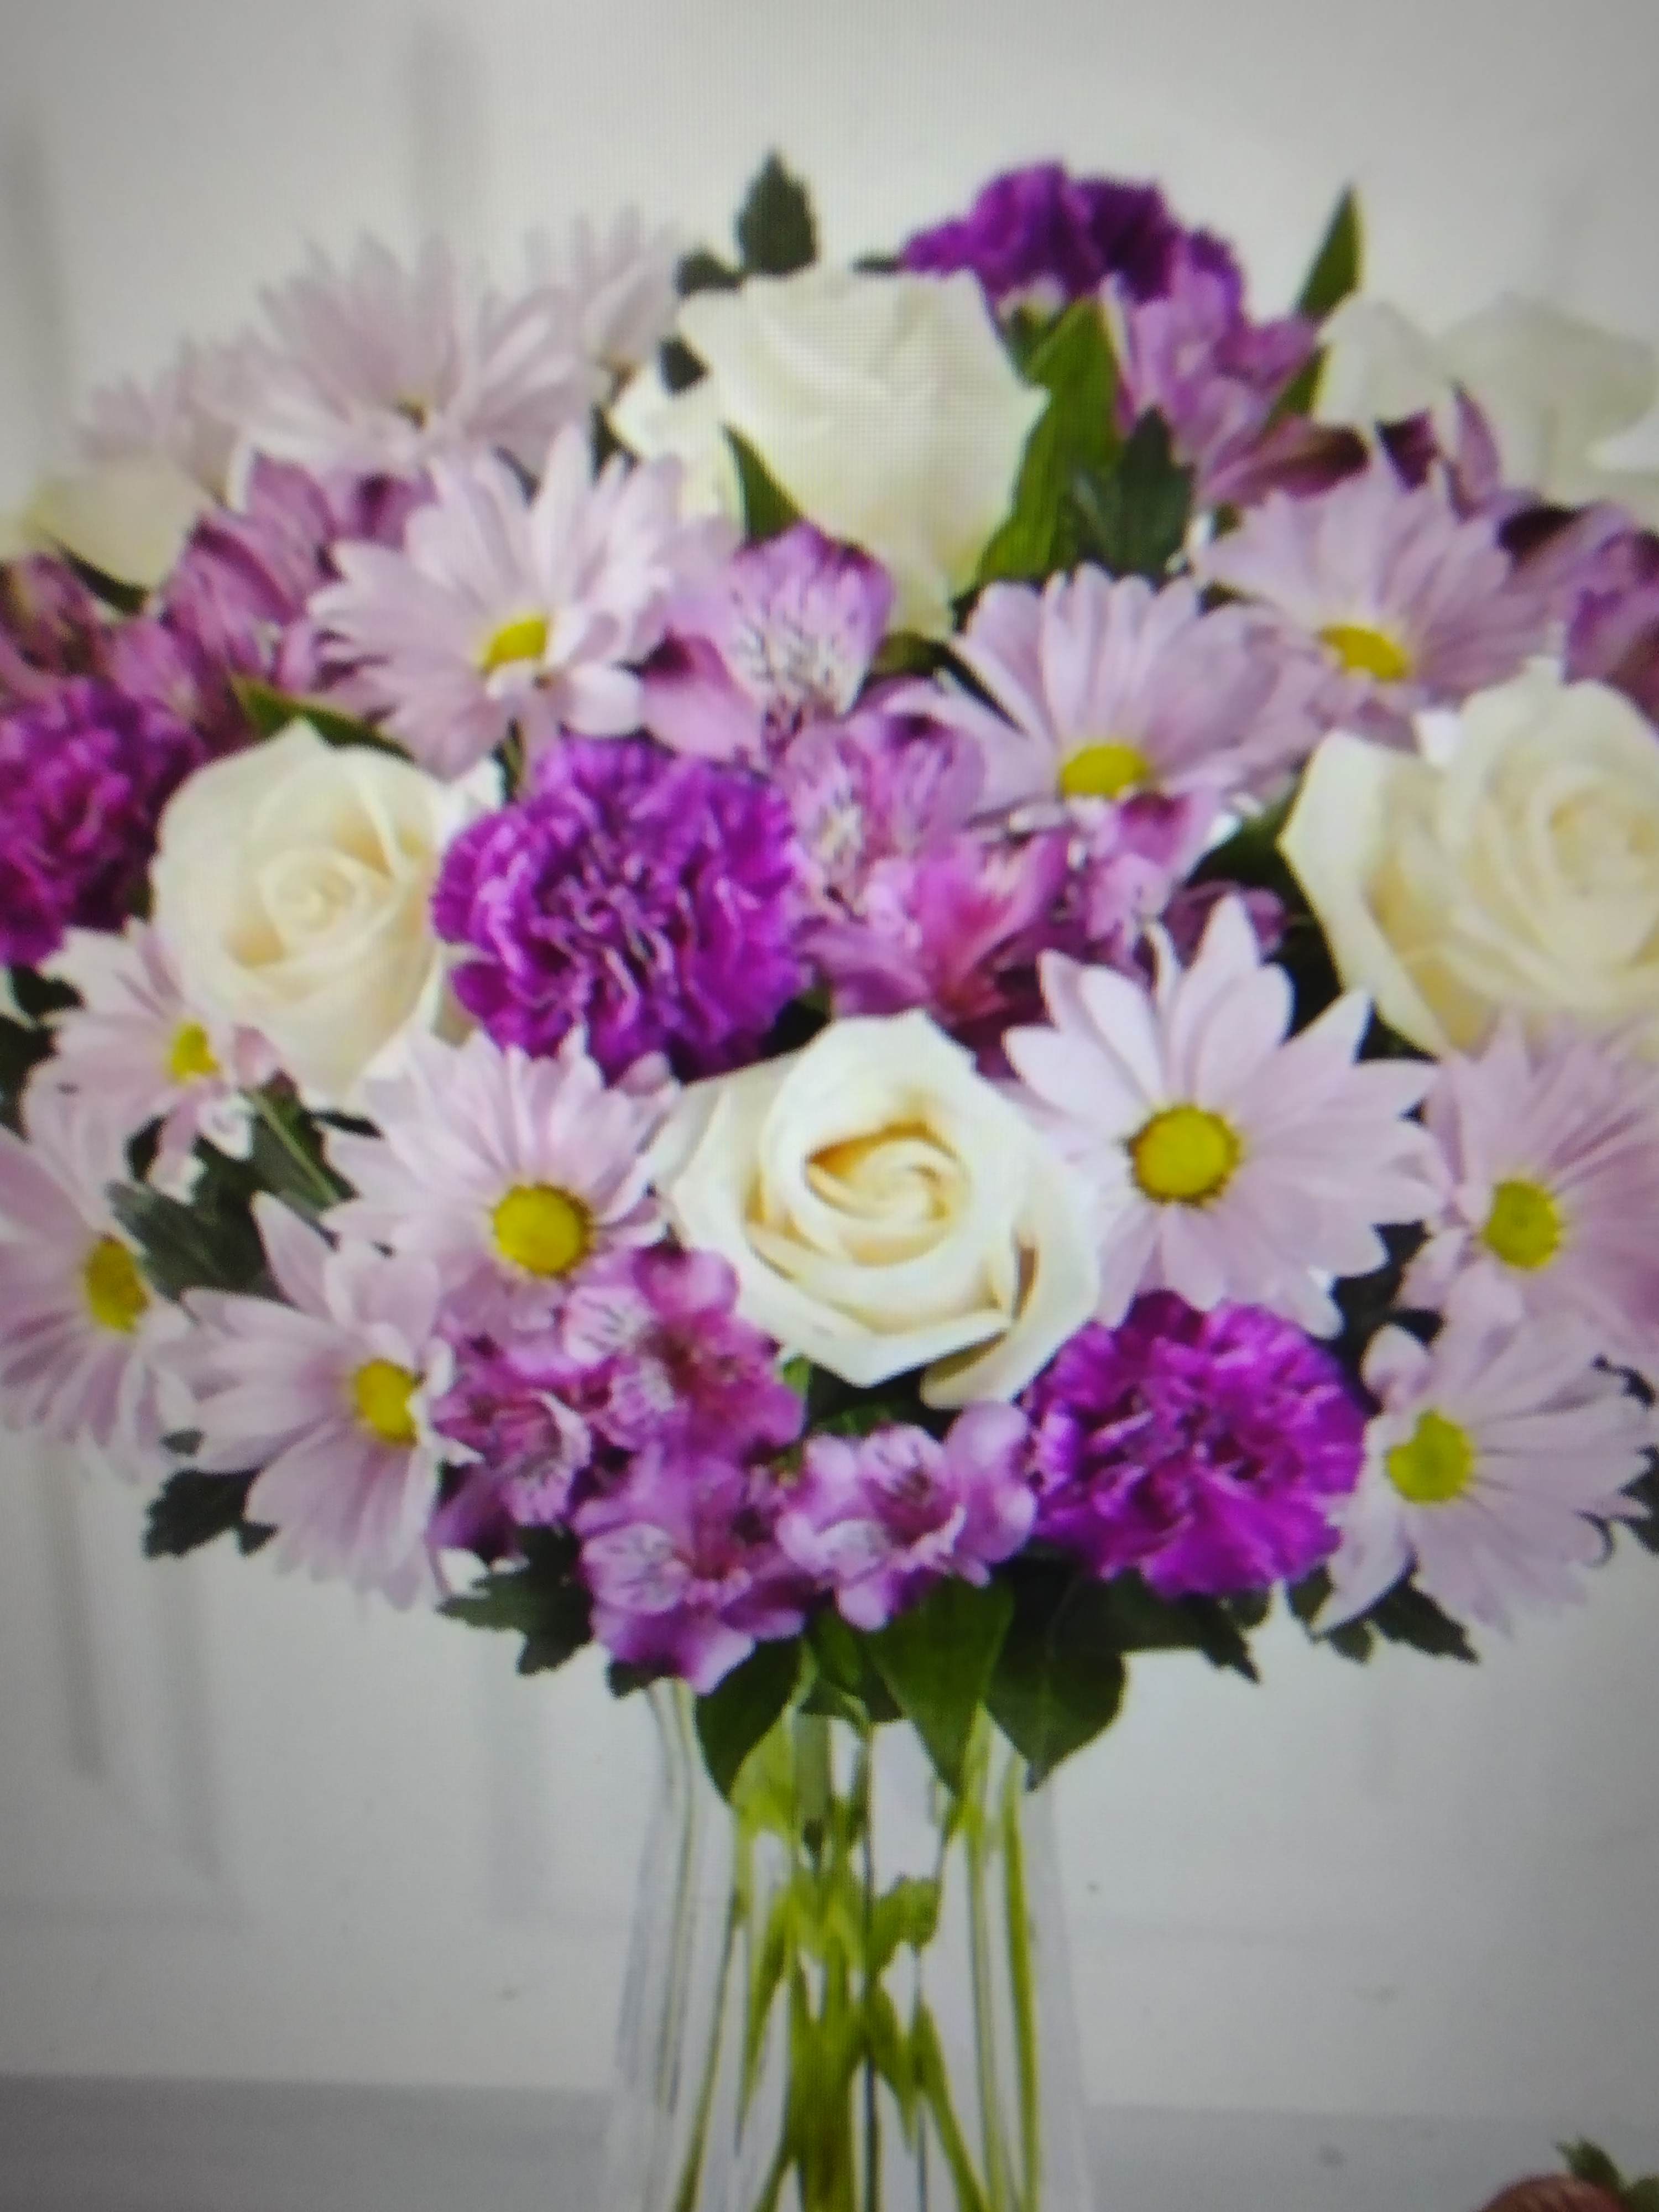 Mother's Day Purple Lover - Beautiful arrrangement full of purple flowers for those who love purple. With an added touch of white roses and fresh lush greenery to round it all out.